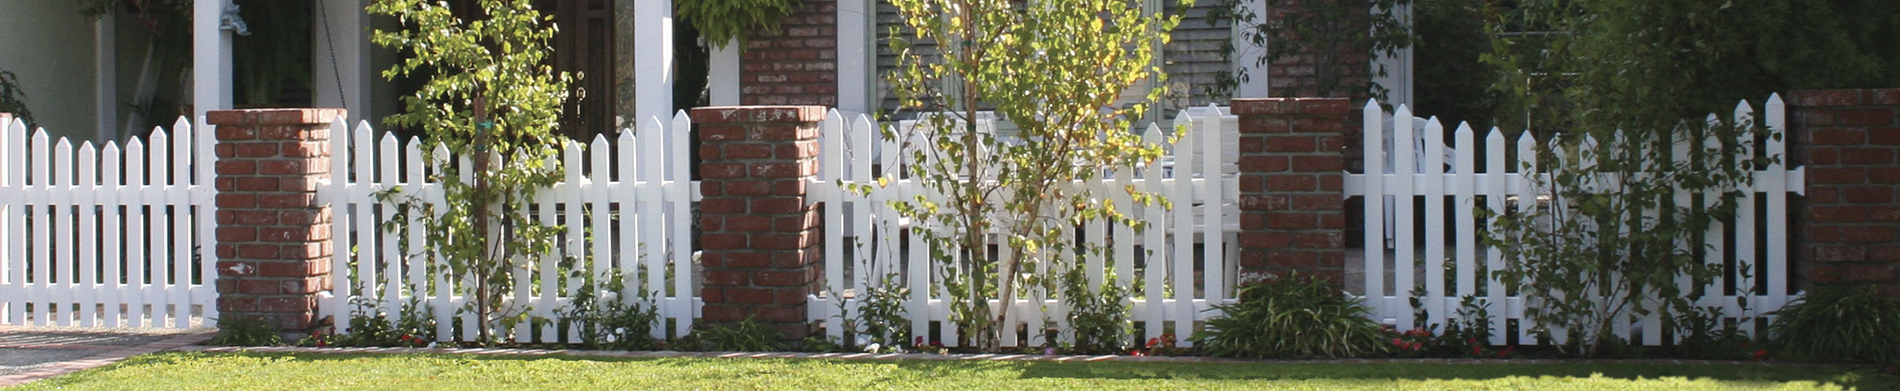 Replace the shabby fence with a new vinyl fence that will never look old – Make estimates with the help of a vinyl fencing calculator